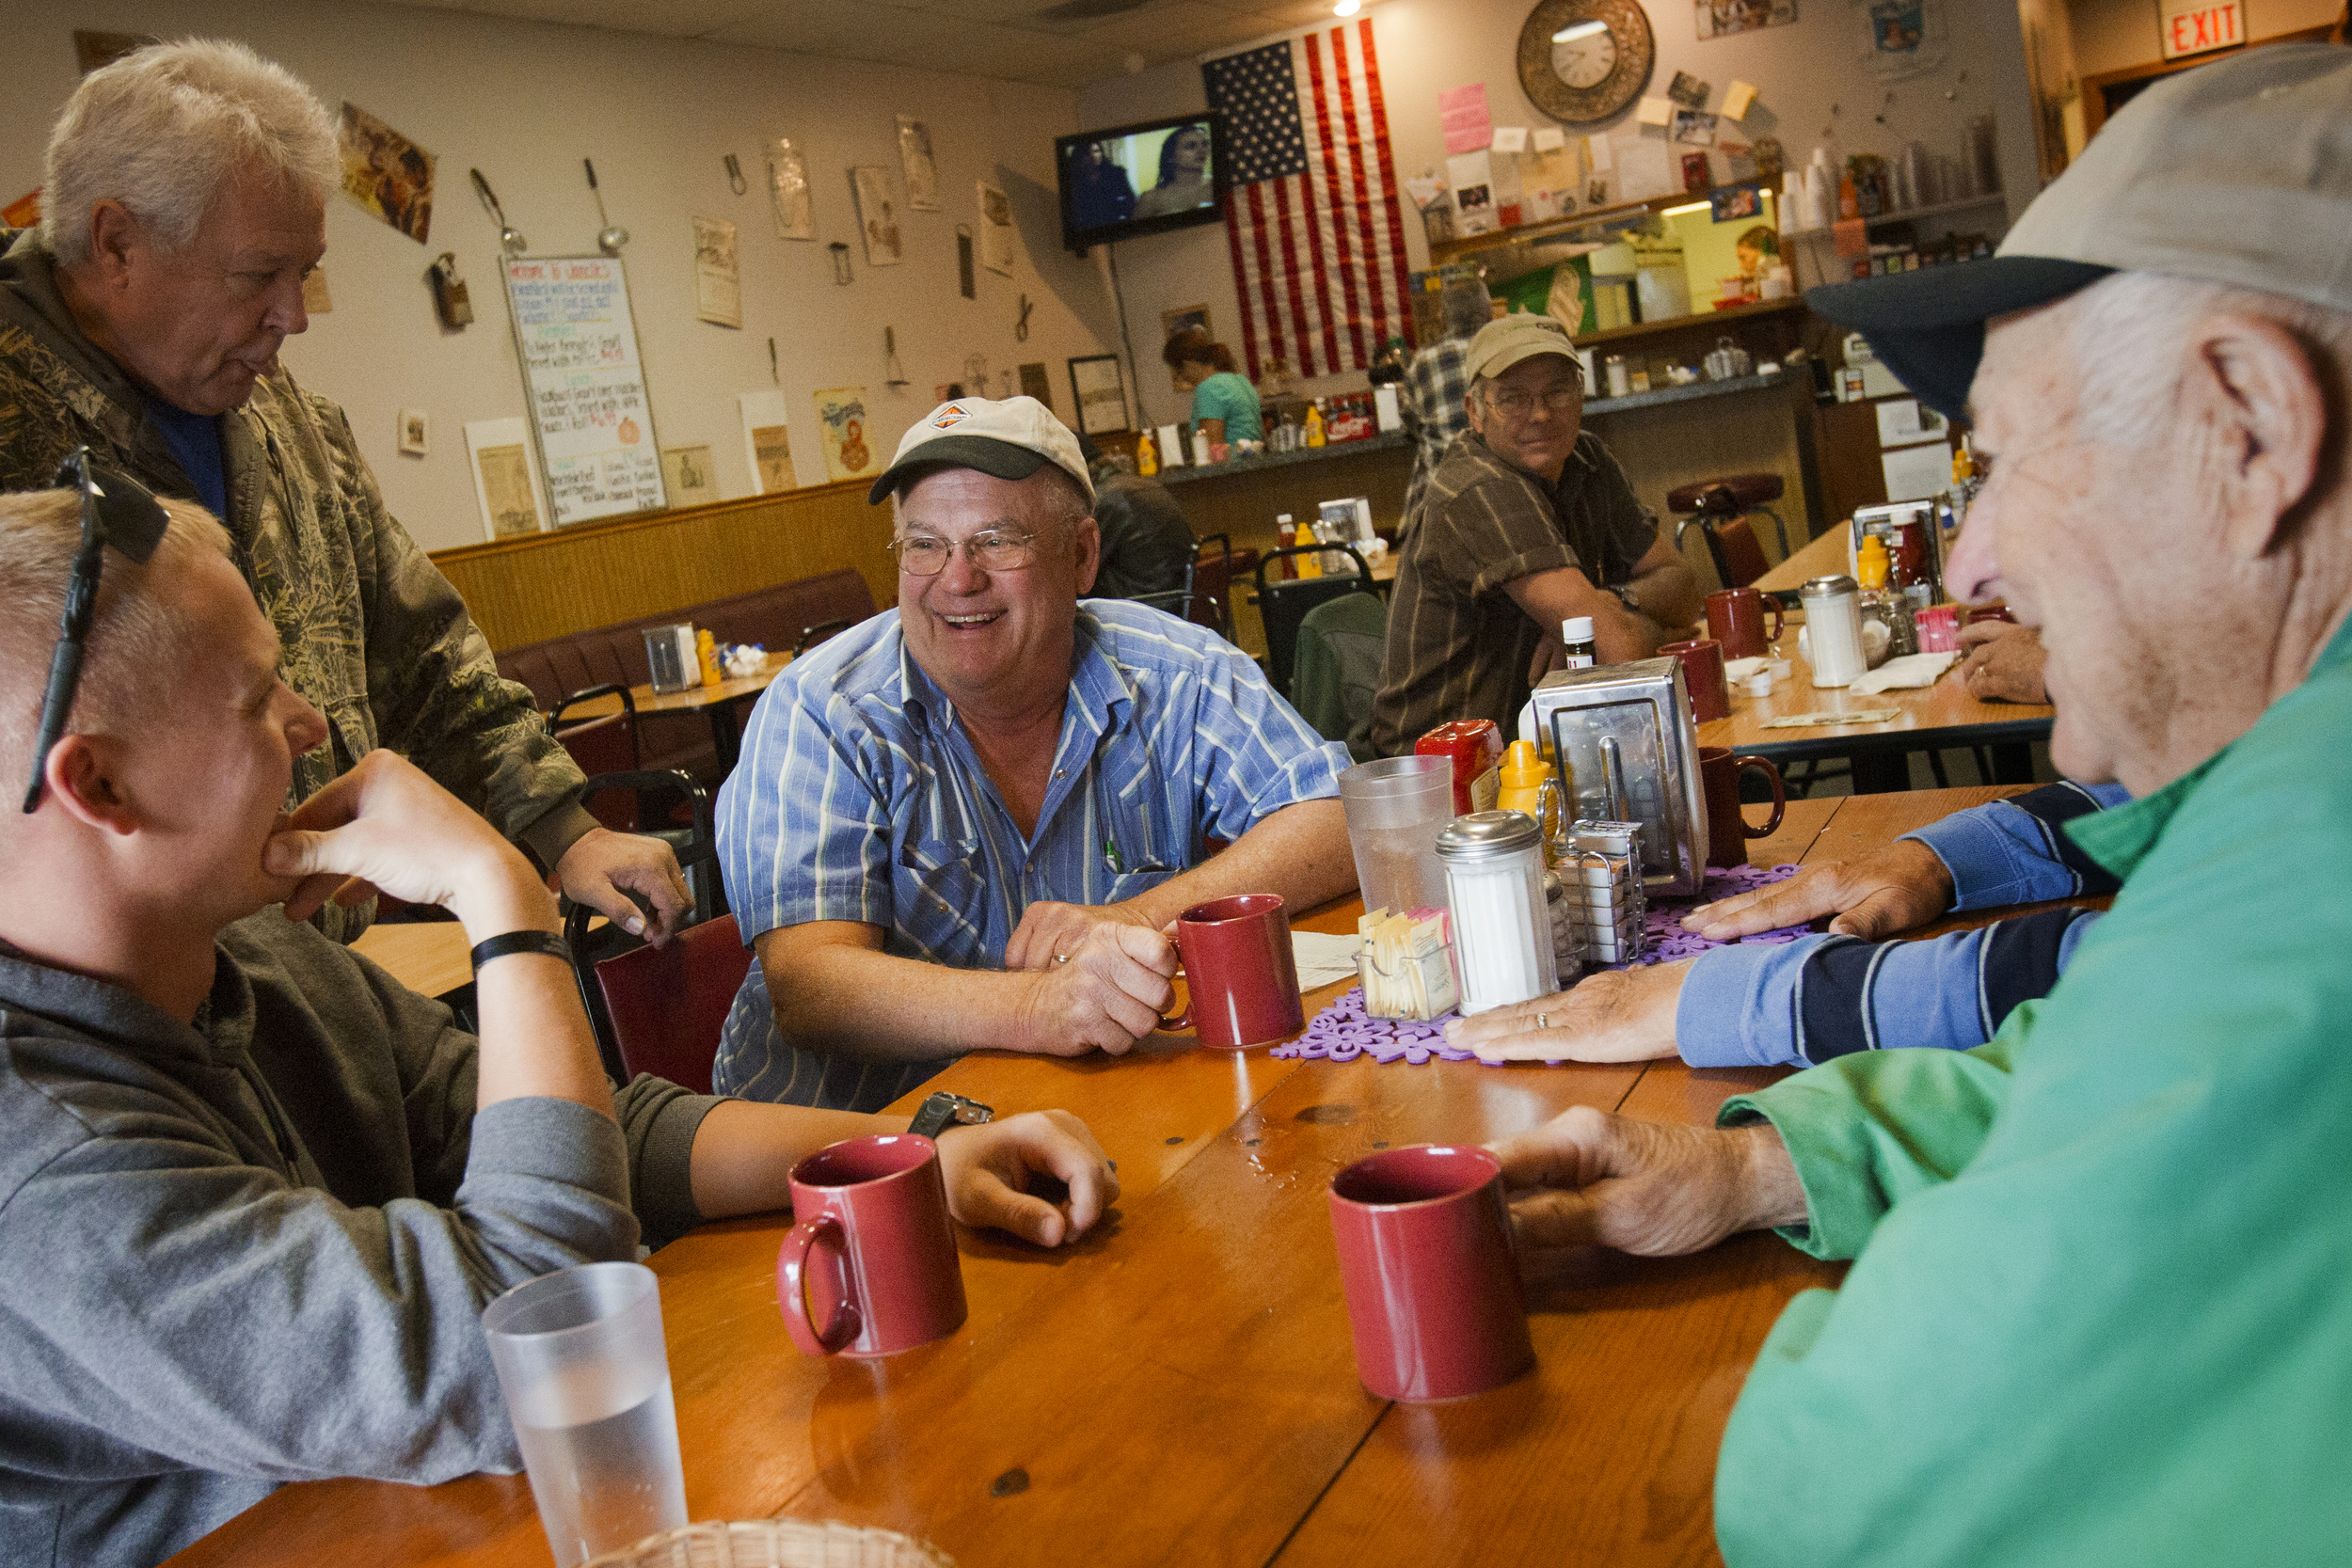  At Janelle's Diner in Pemberville, Ohio, Jim Witker, center, revels in the welcome his fellow dinners give his son, Arik, left, who is home from his latest military tour of duty in Afghanistan. Jim Witker says he feels neither major political party 